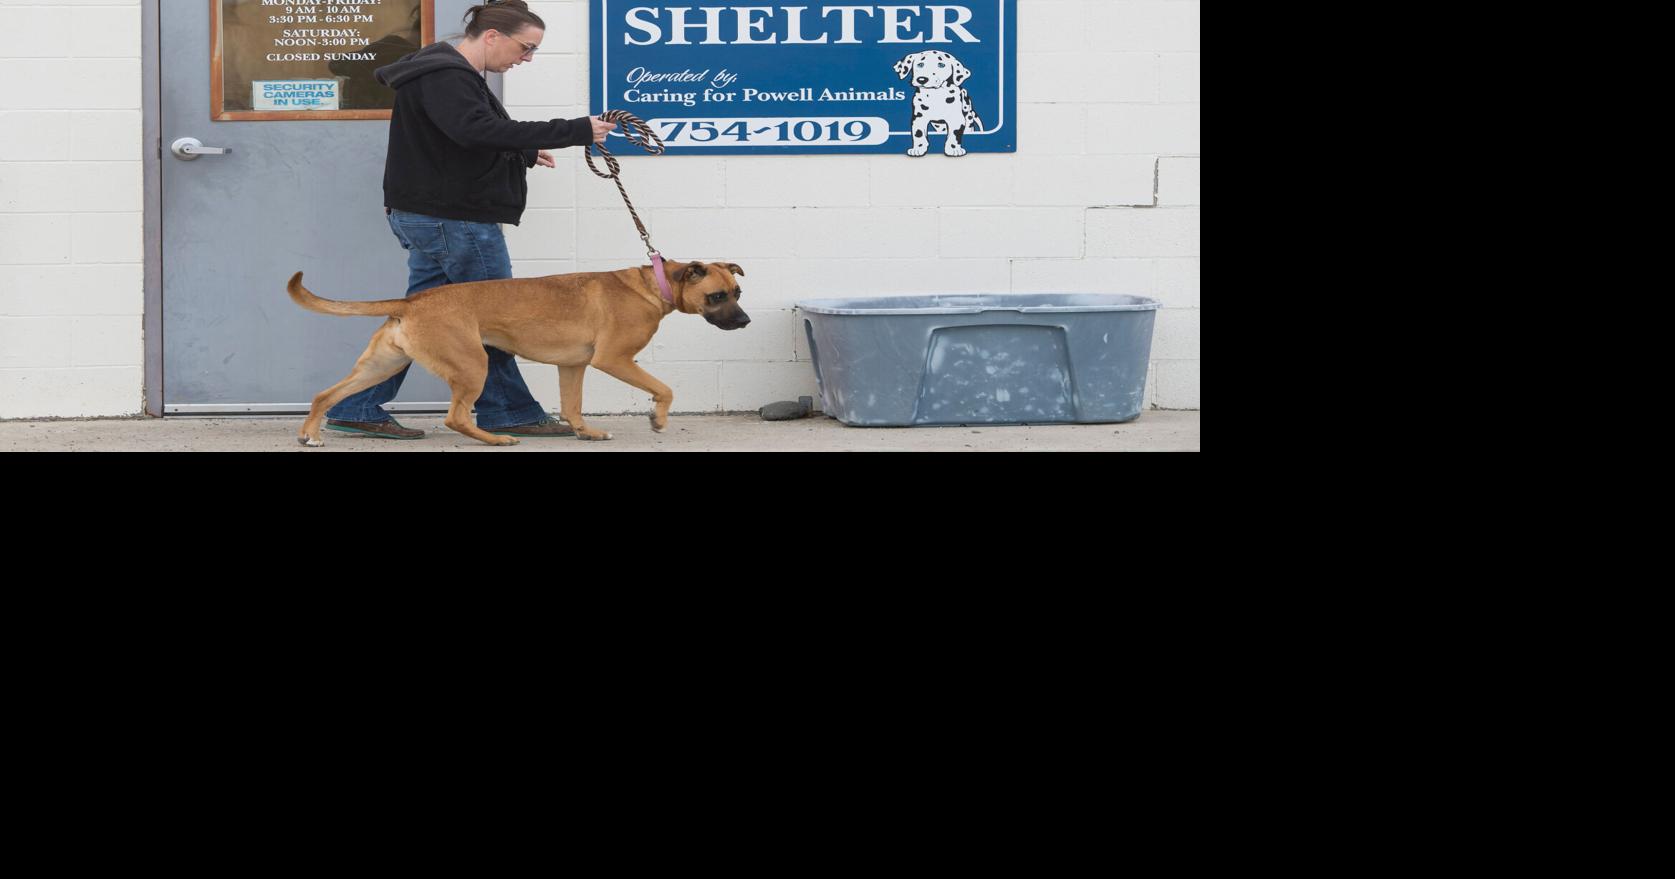 How to Start an Animal Rescue (6 Simple Steps)